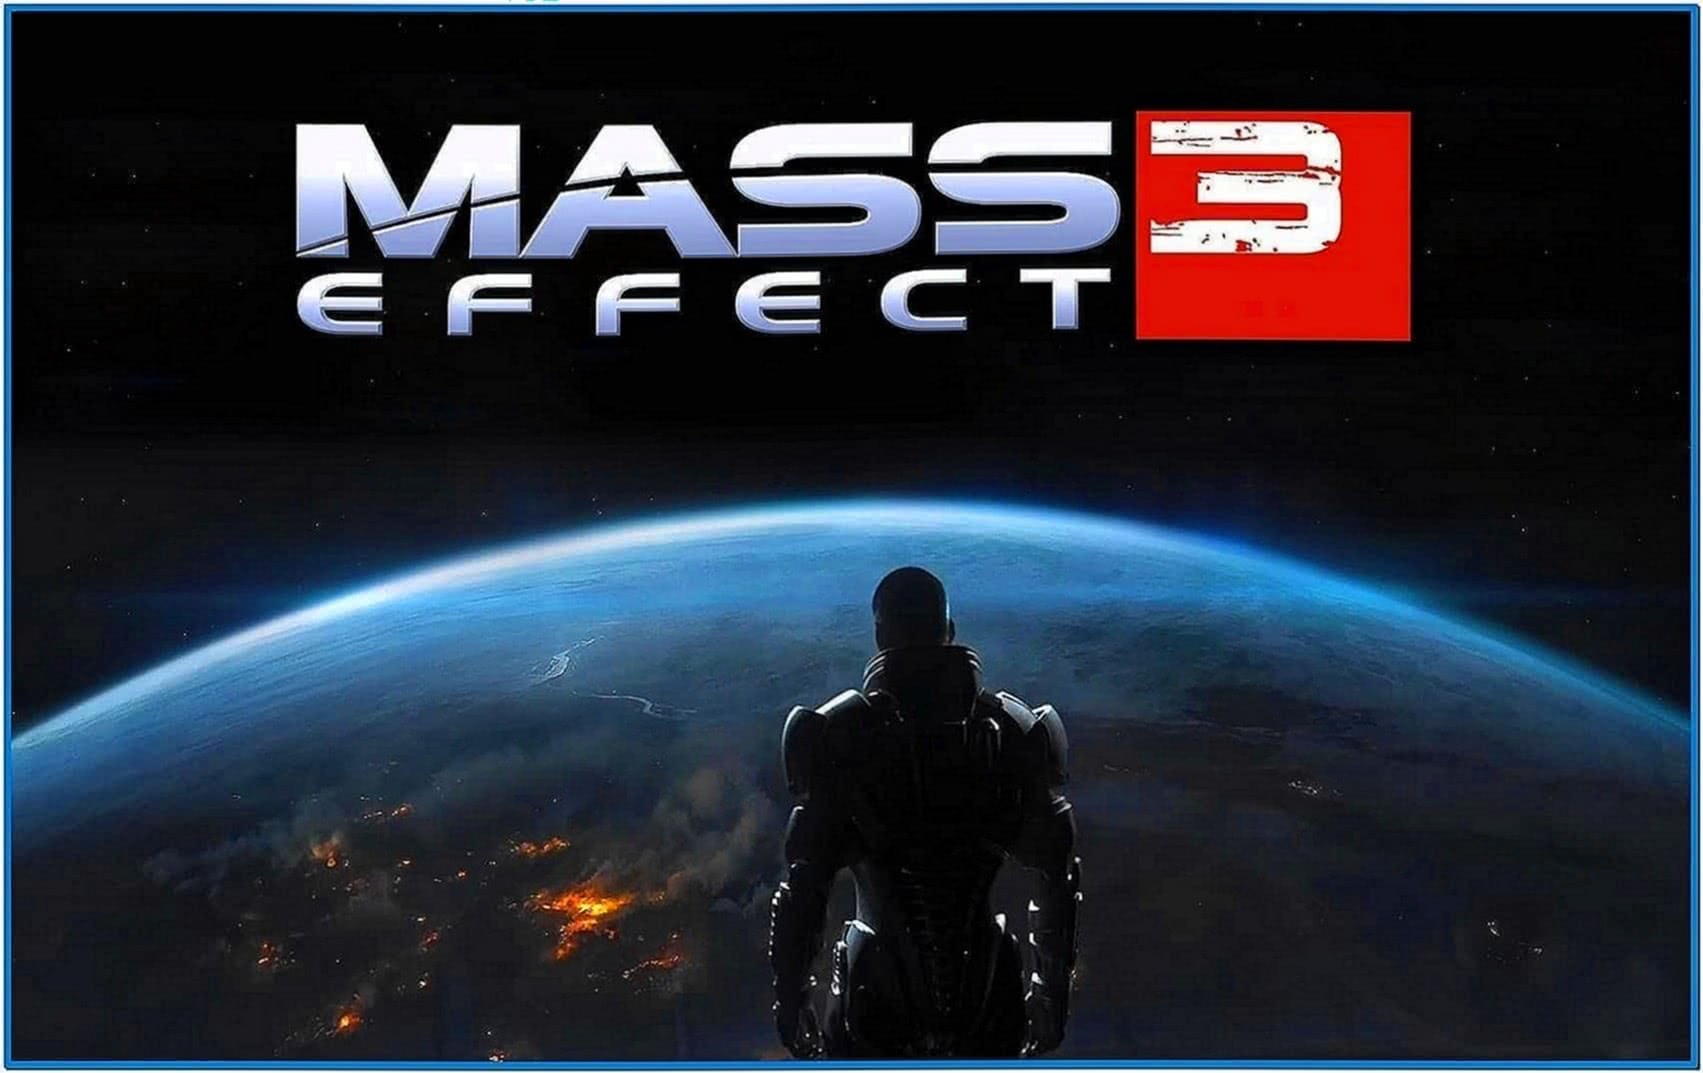 Mass effect 3 animated screensaver - Download free